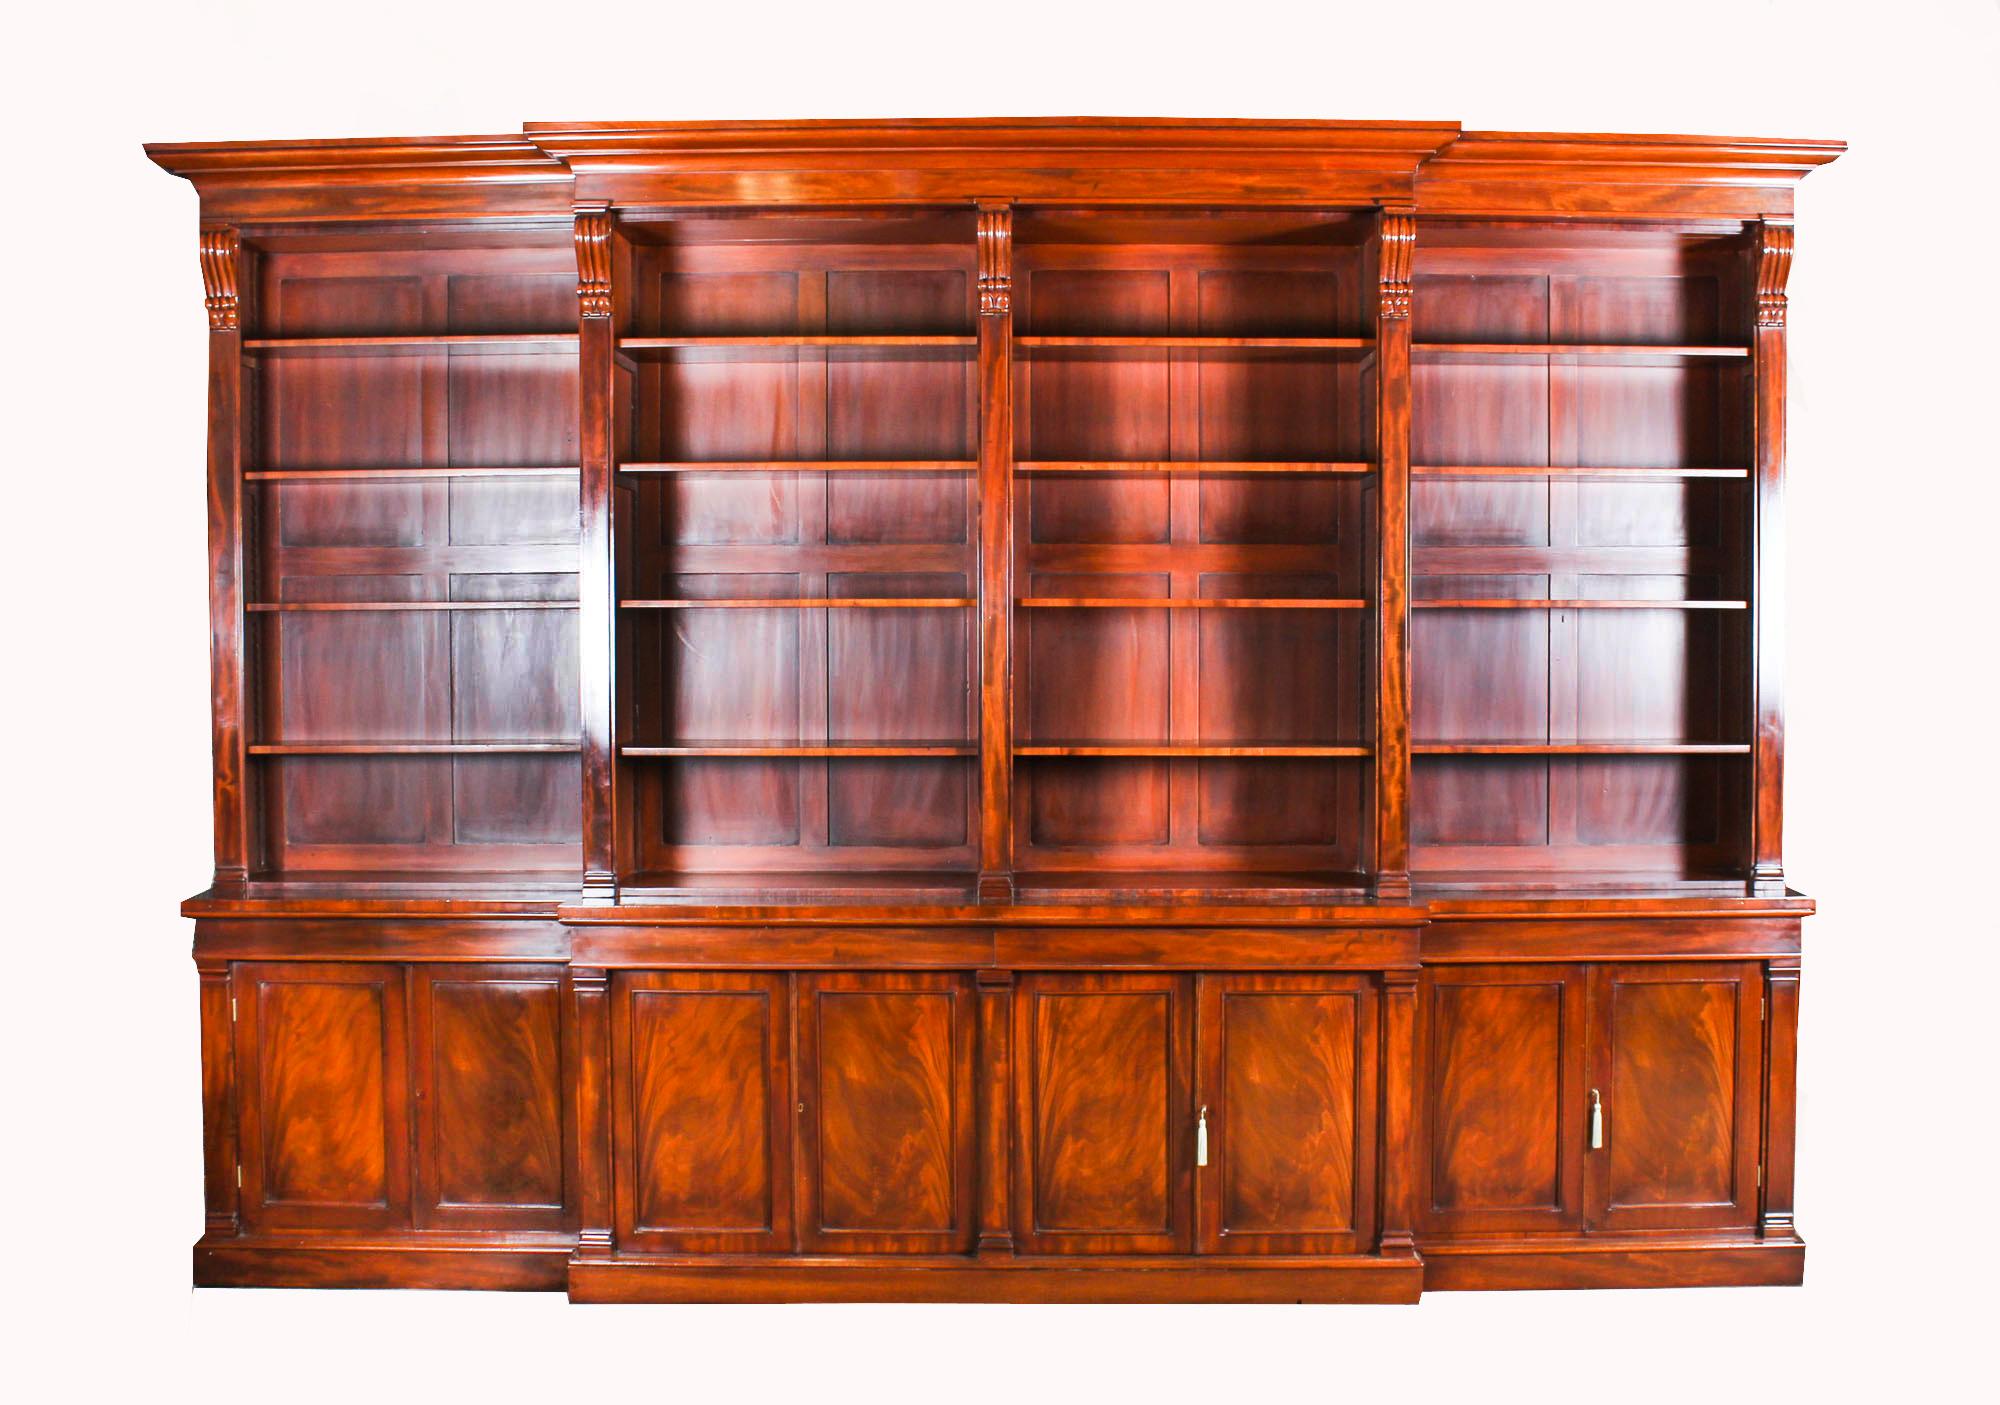 This is a stunning monumental antique Regency period mahogany breakfront bookcase, circa 1820 in date.

It is of wonderful quality, has a rich and striking grain, and has been accomplished in beautiful flame mahogany. The top part has a decorative